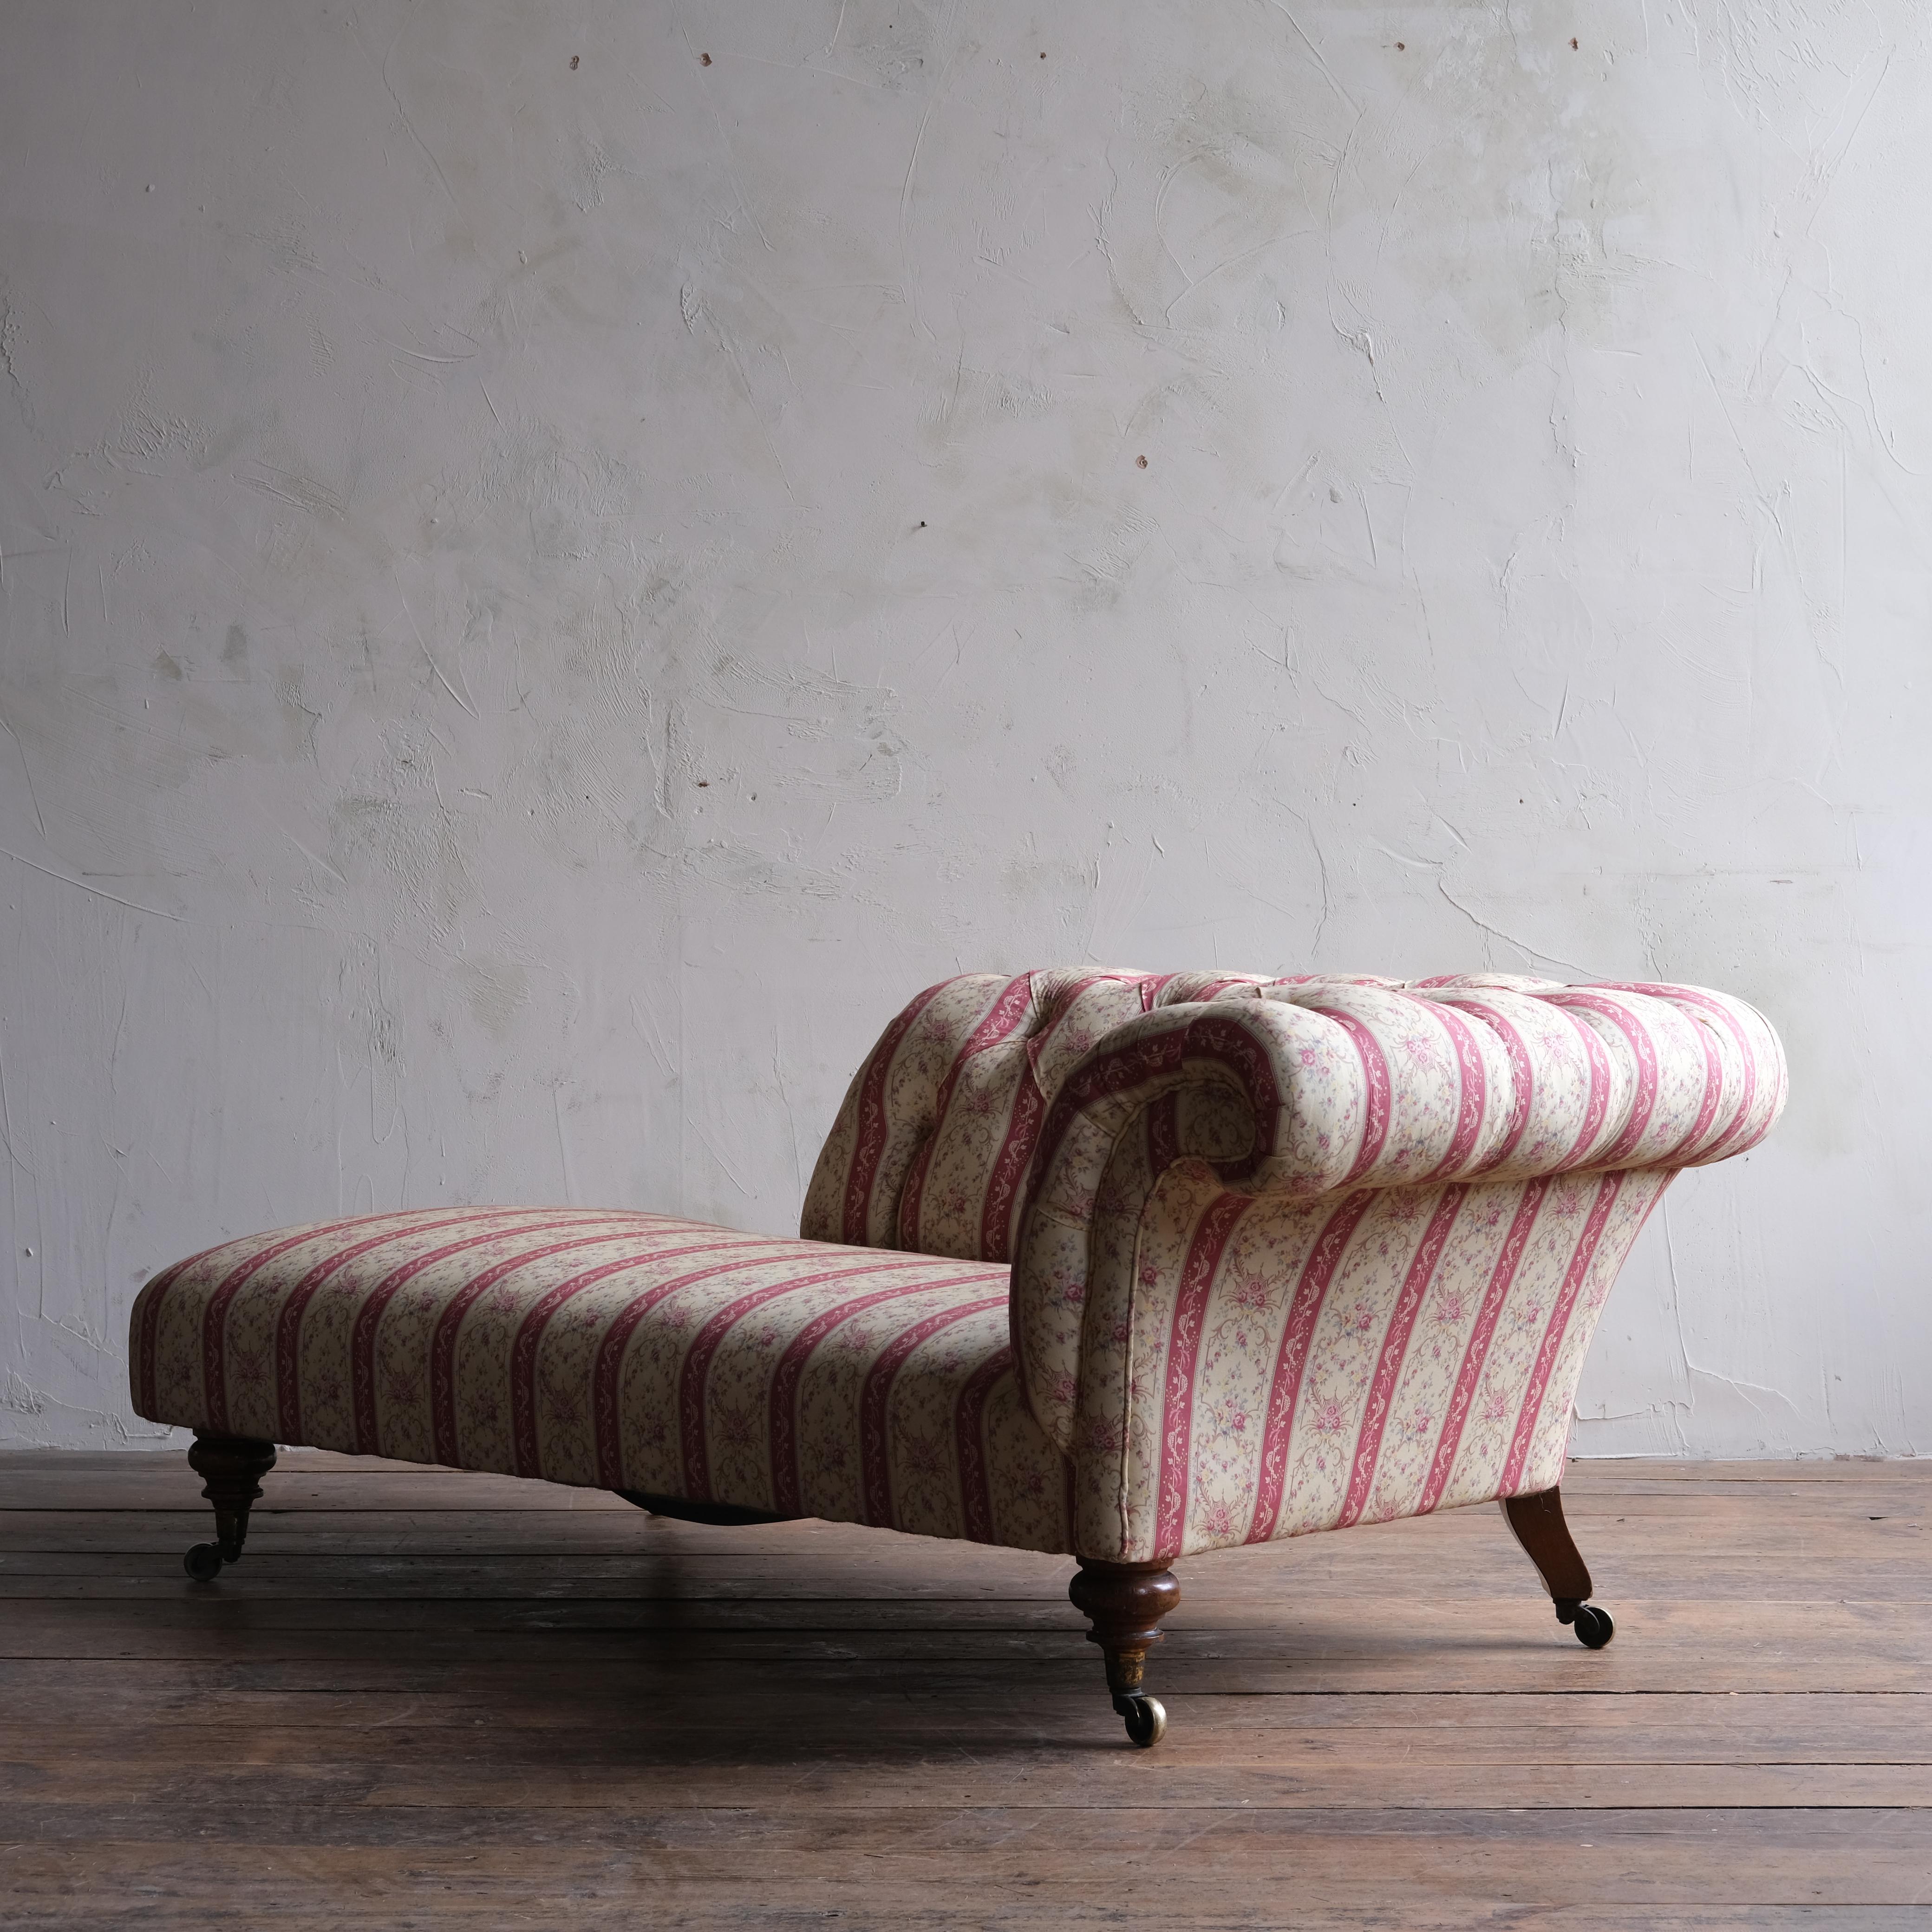 British Howard and Sons Chesterfield Chaise Lounge C1860 For Sale